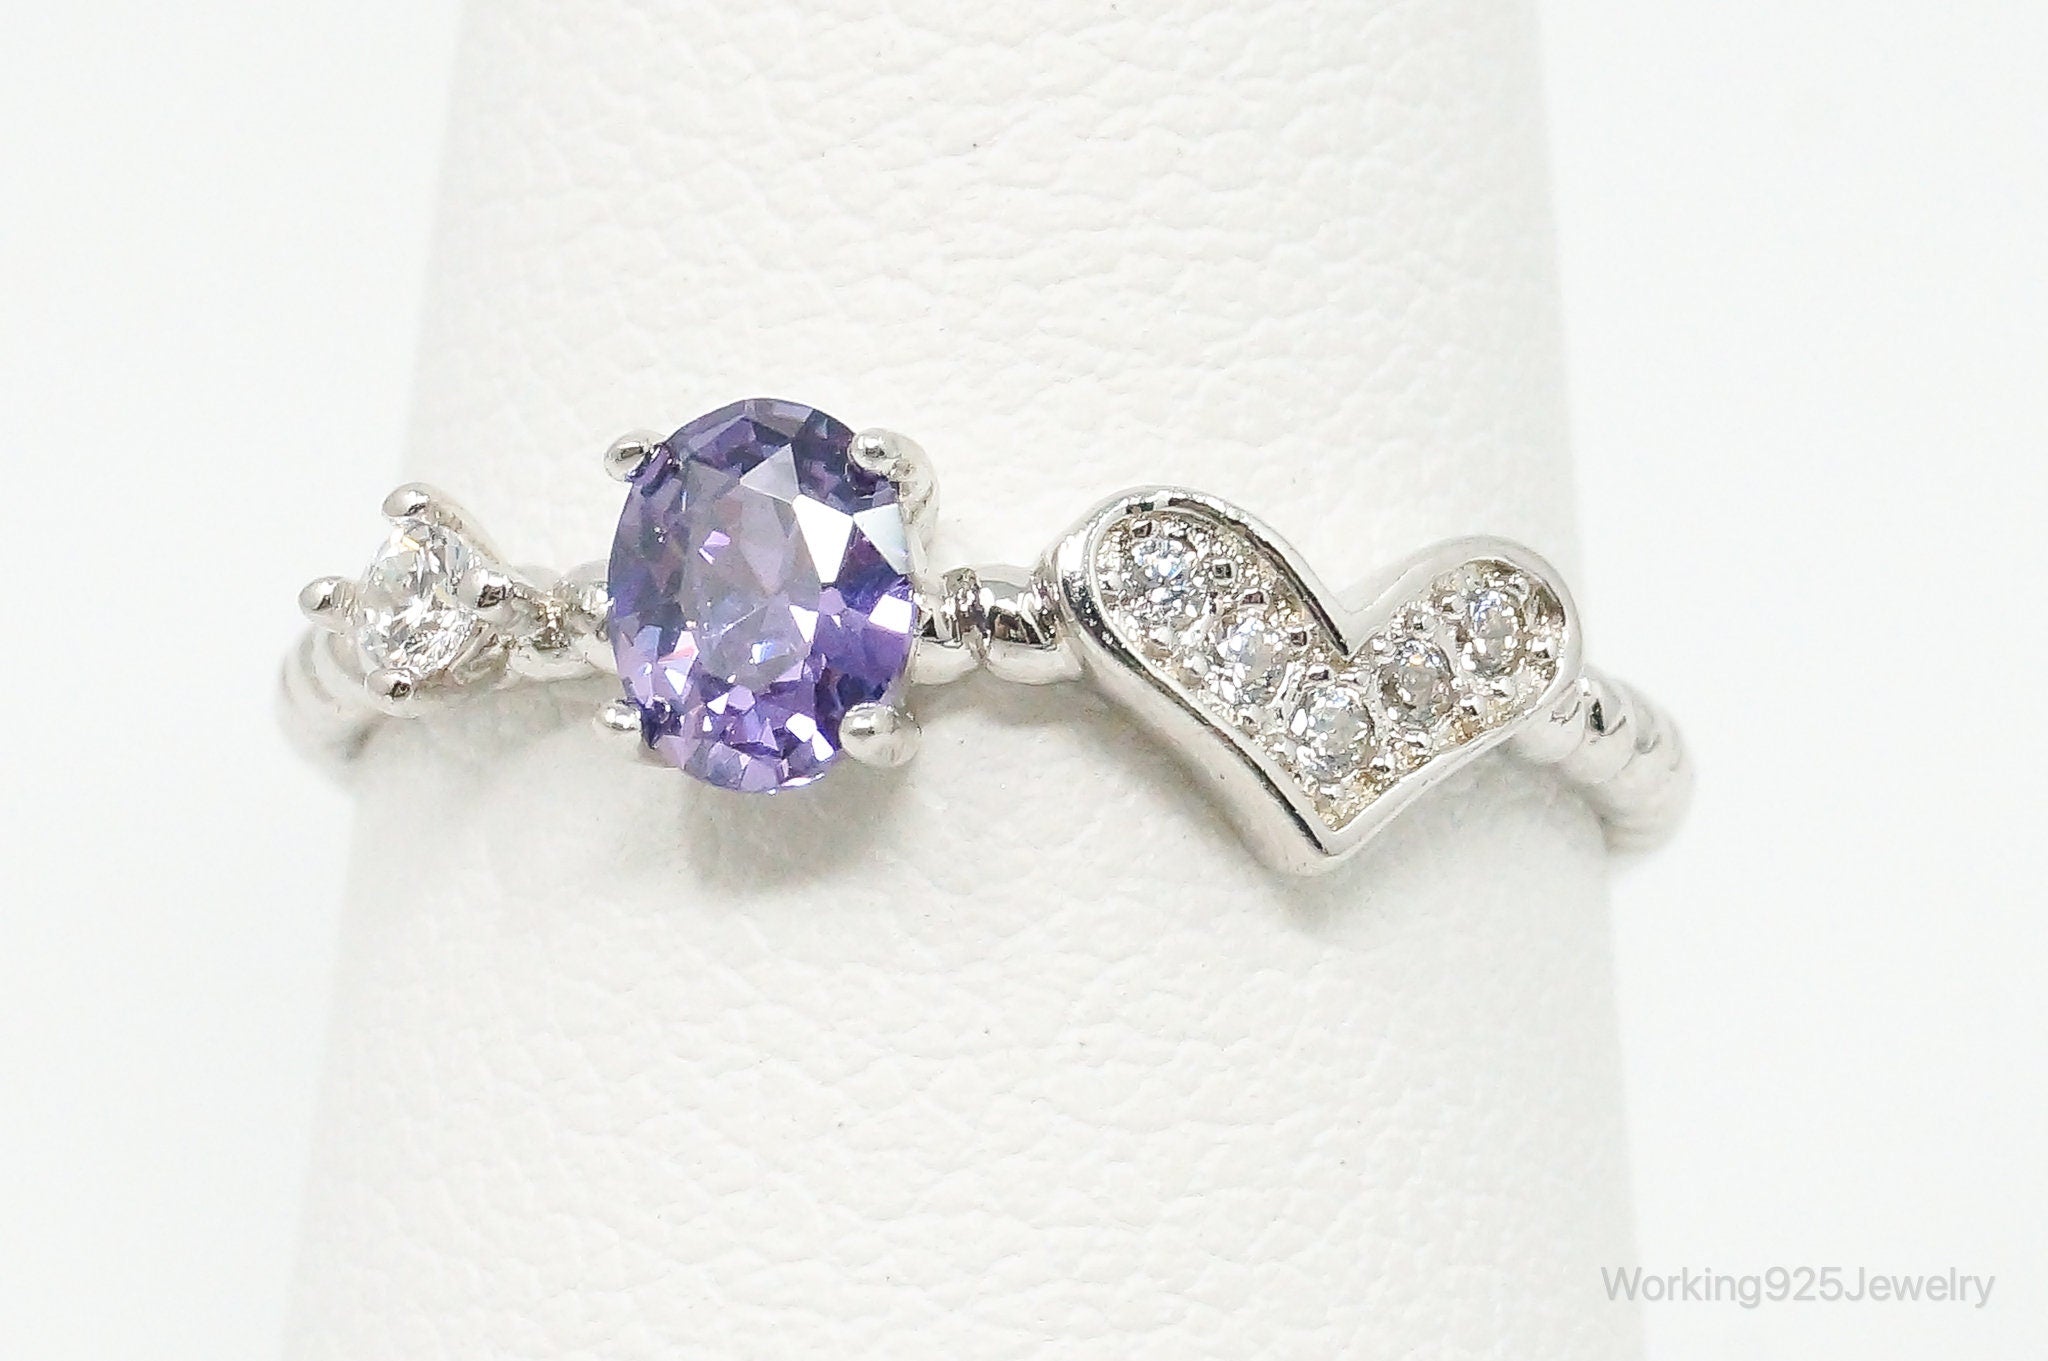 Vintage Amethyst Cubic Zirconia Heart Sterling Silver Ring - Size 6.5 Adjustable